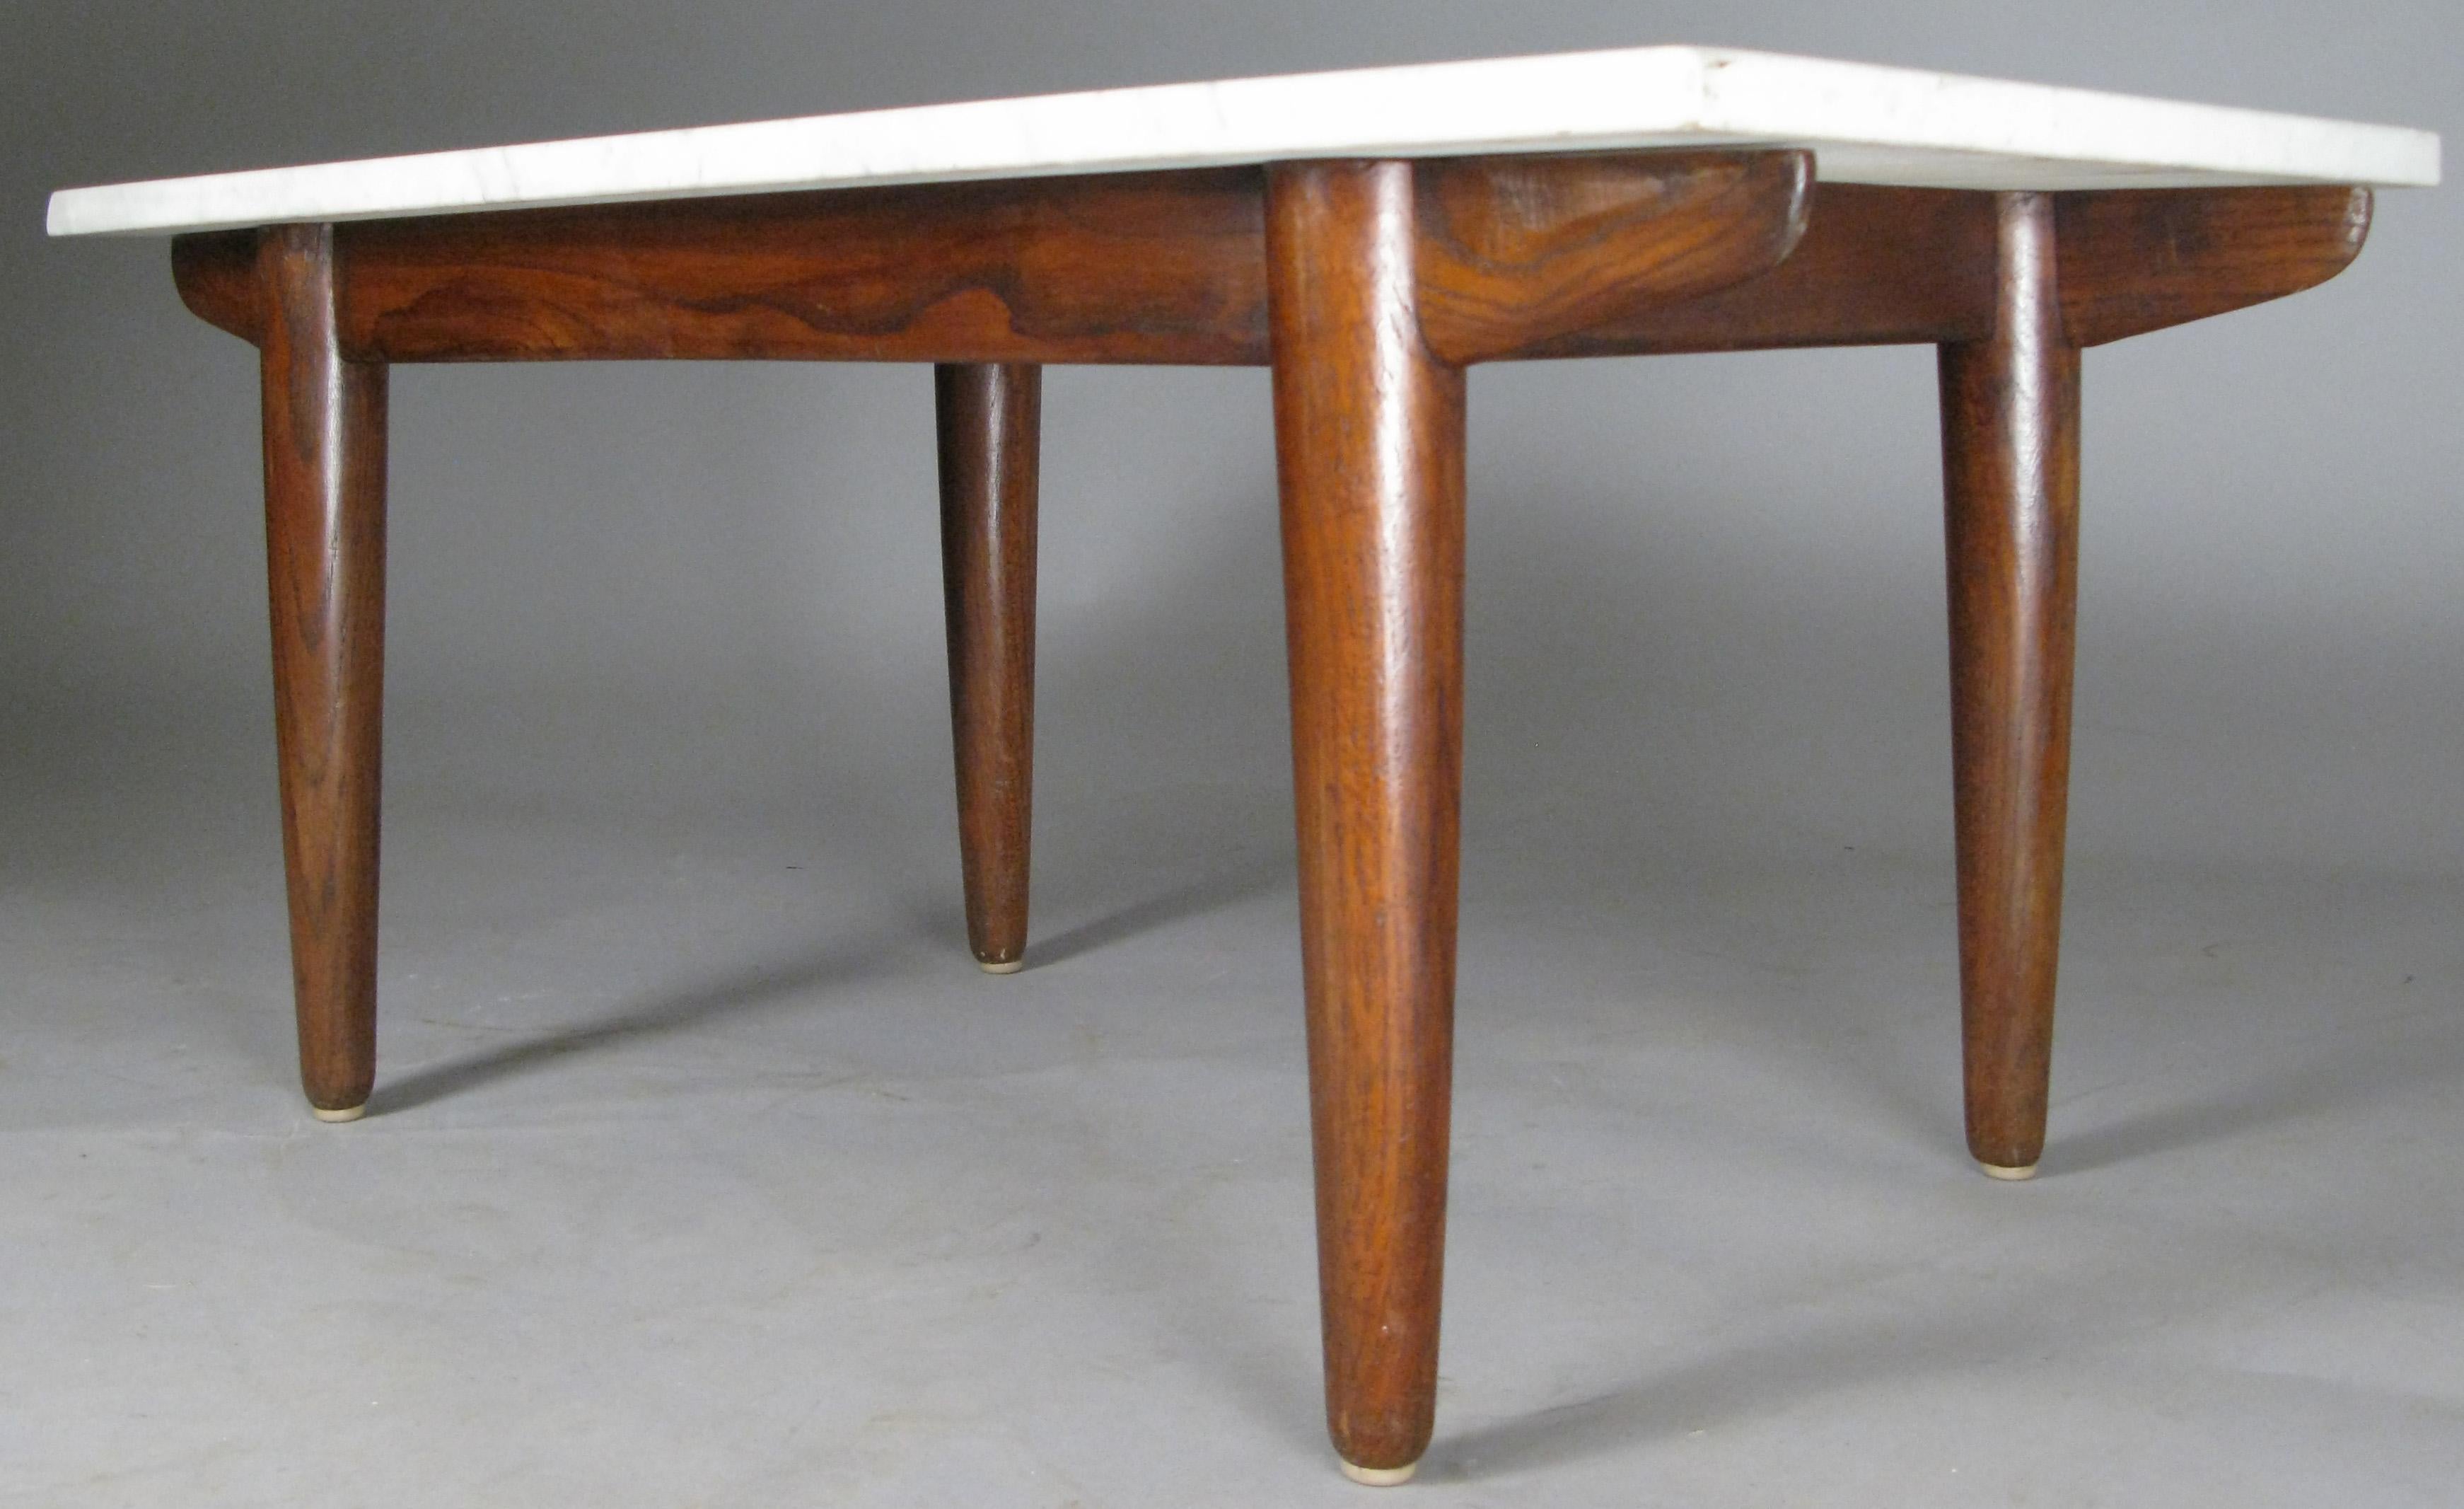 A very handsome 1950s coffee table with a base of beautifully grained oak, and a white & grey italian marble top.